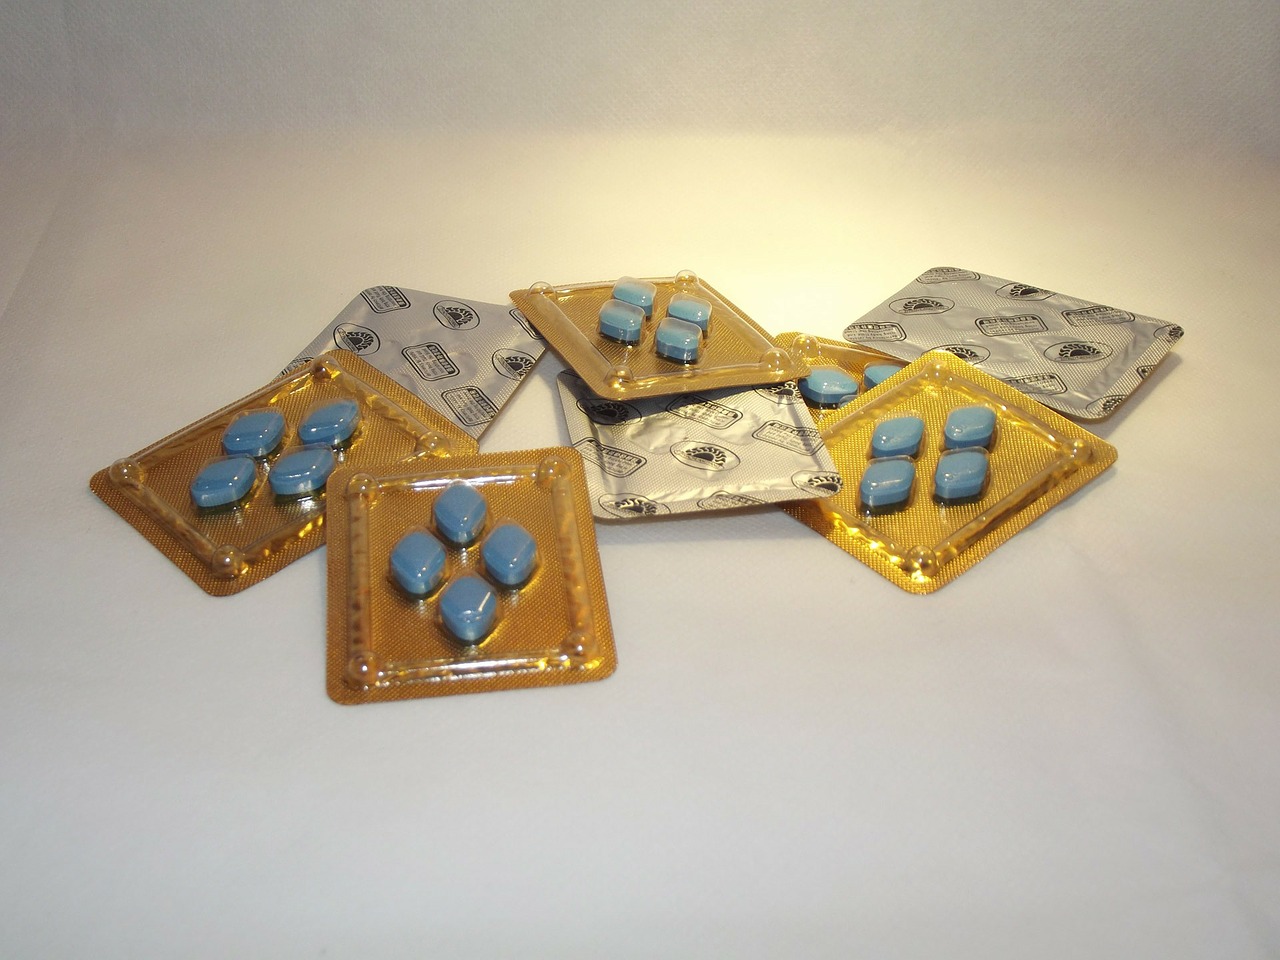 Viagra could be used to prevent and treat Alzheimer's disease